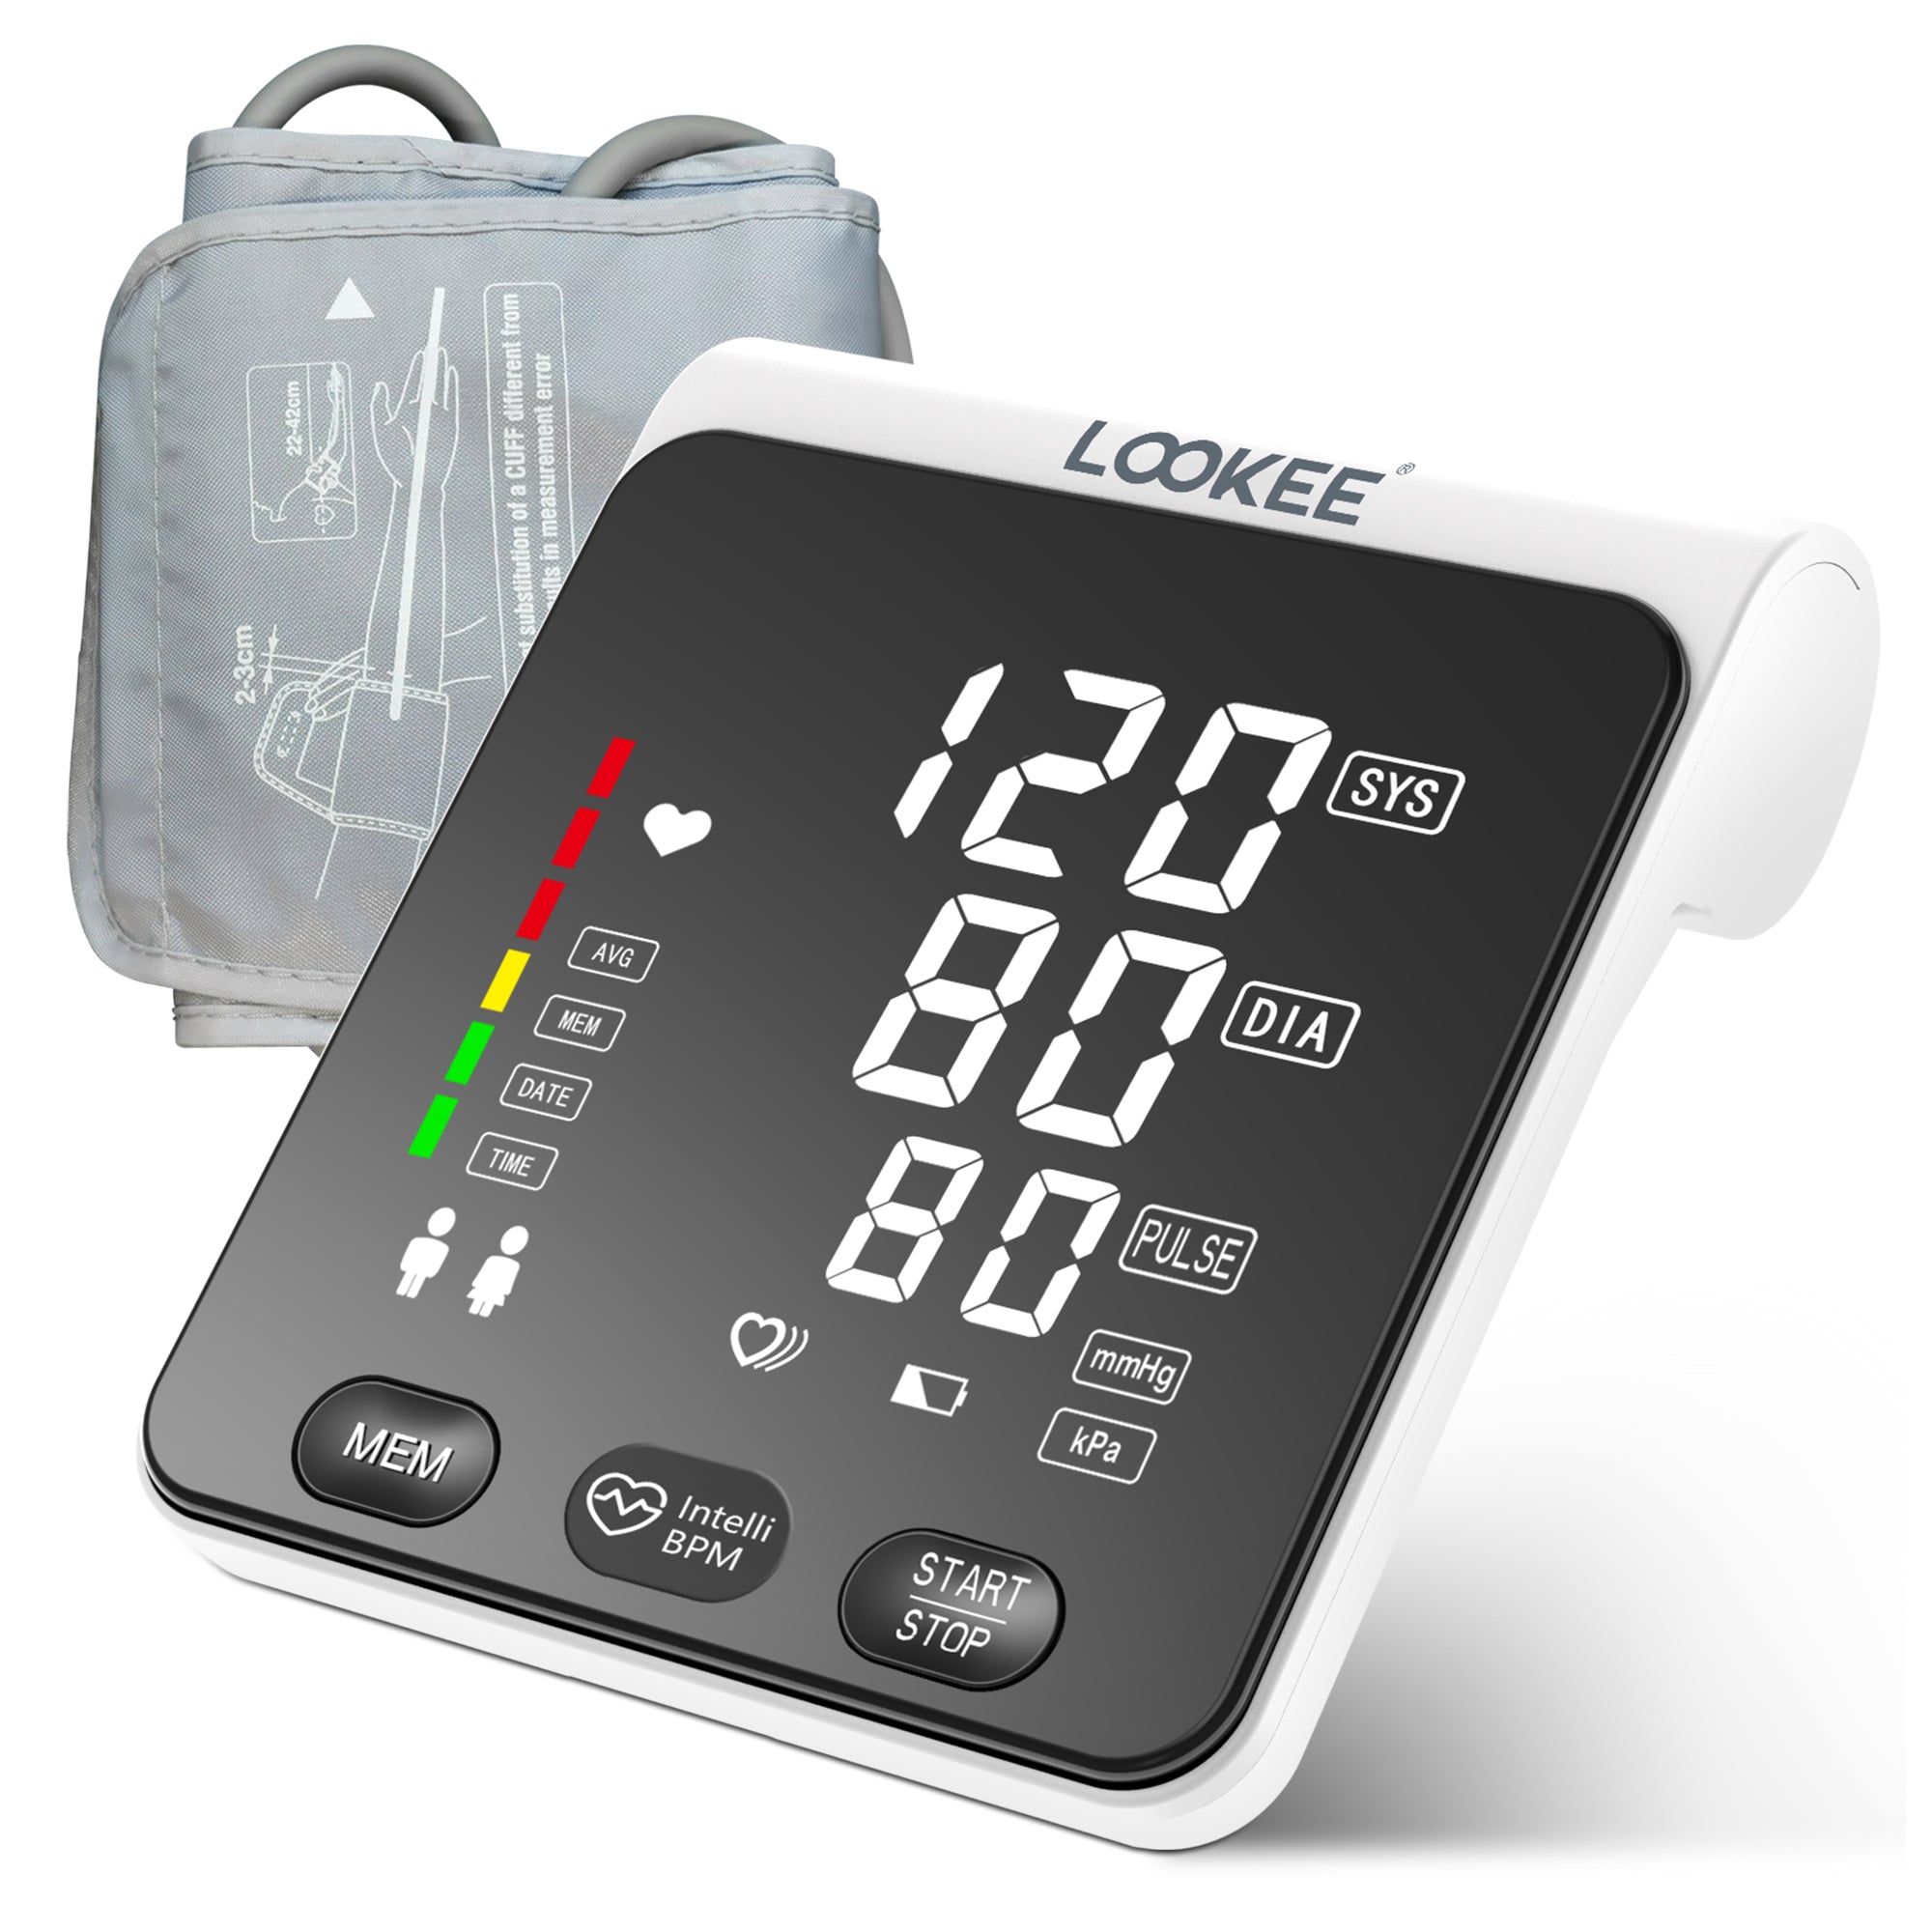 Fda Approved Upper Arm Blood Pressure Monitor Automatic Large Lcd